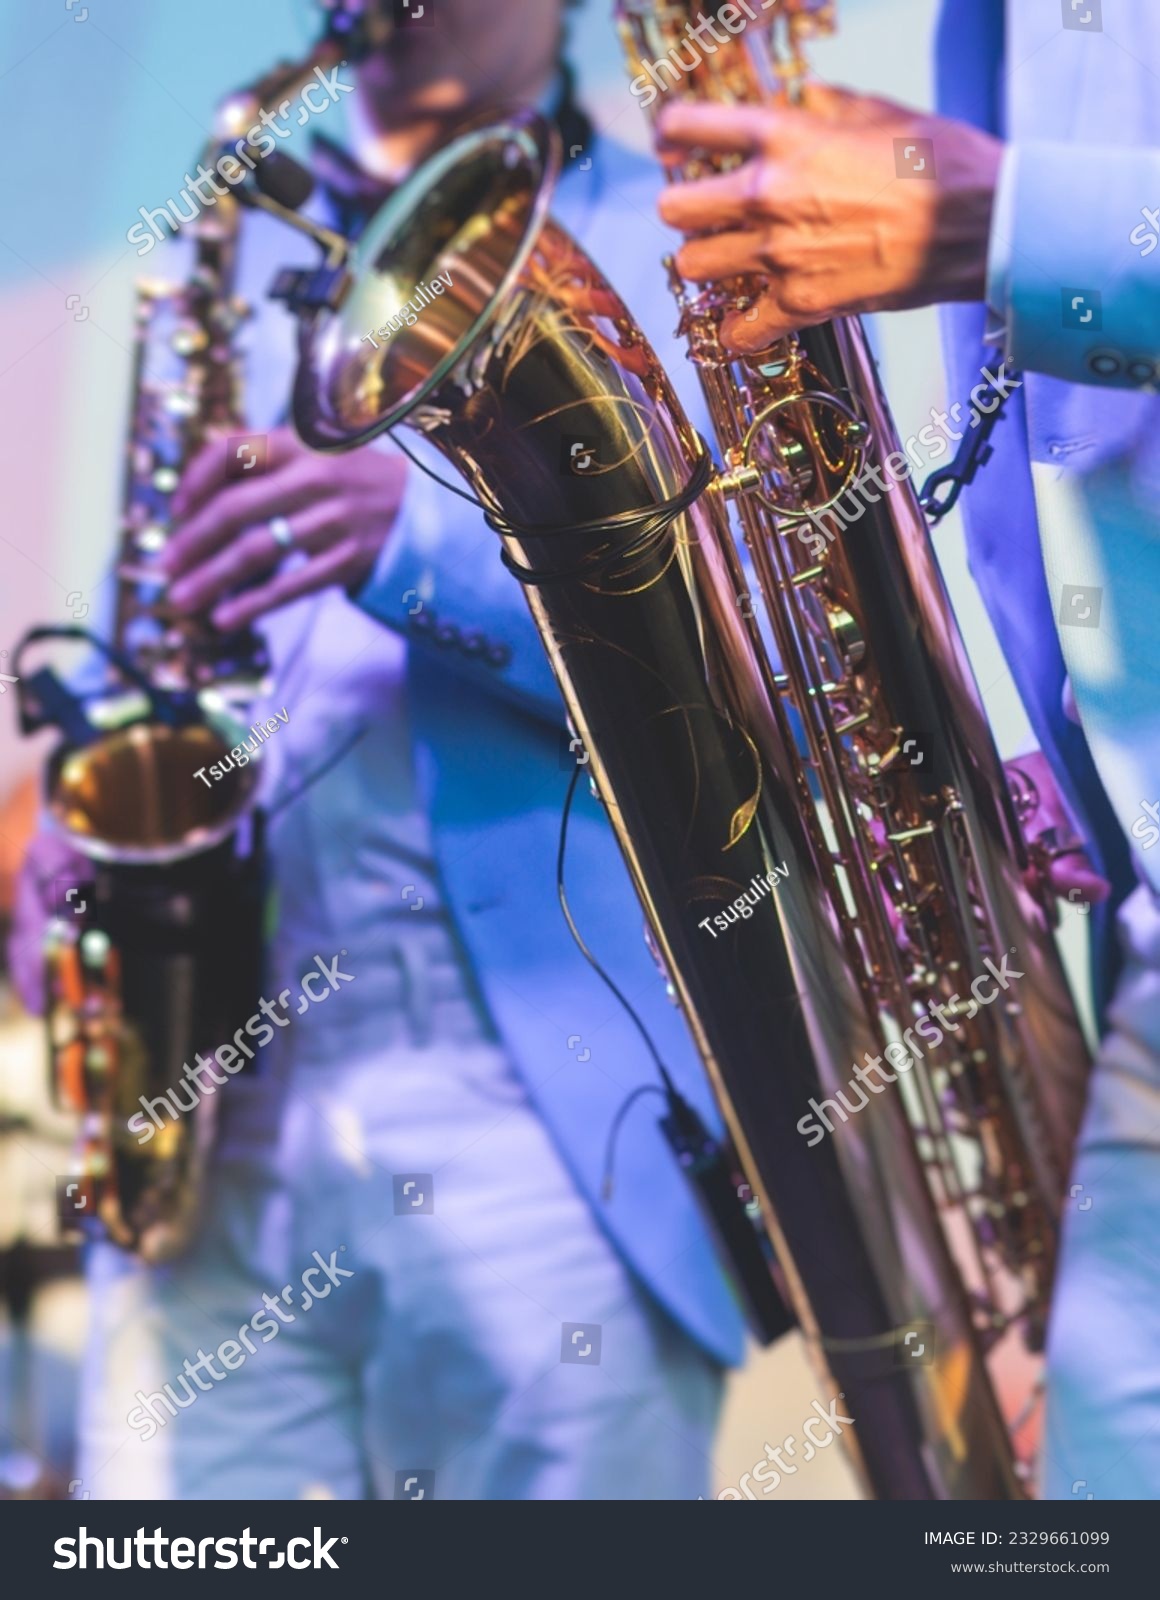 Concert view of saxophonist in a blue and white suit, a saxophone sax player with vocalist and musical band during jazz orchestra show performing music on stage in the scene lights #2329661099